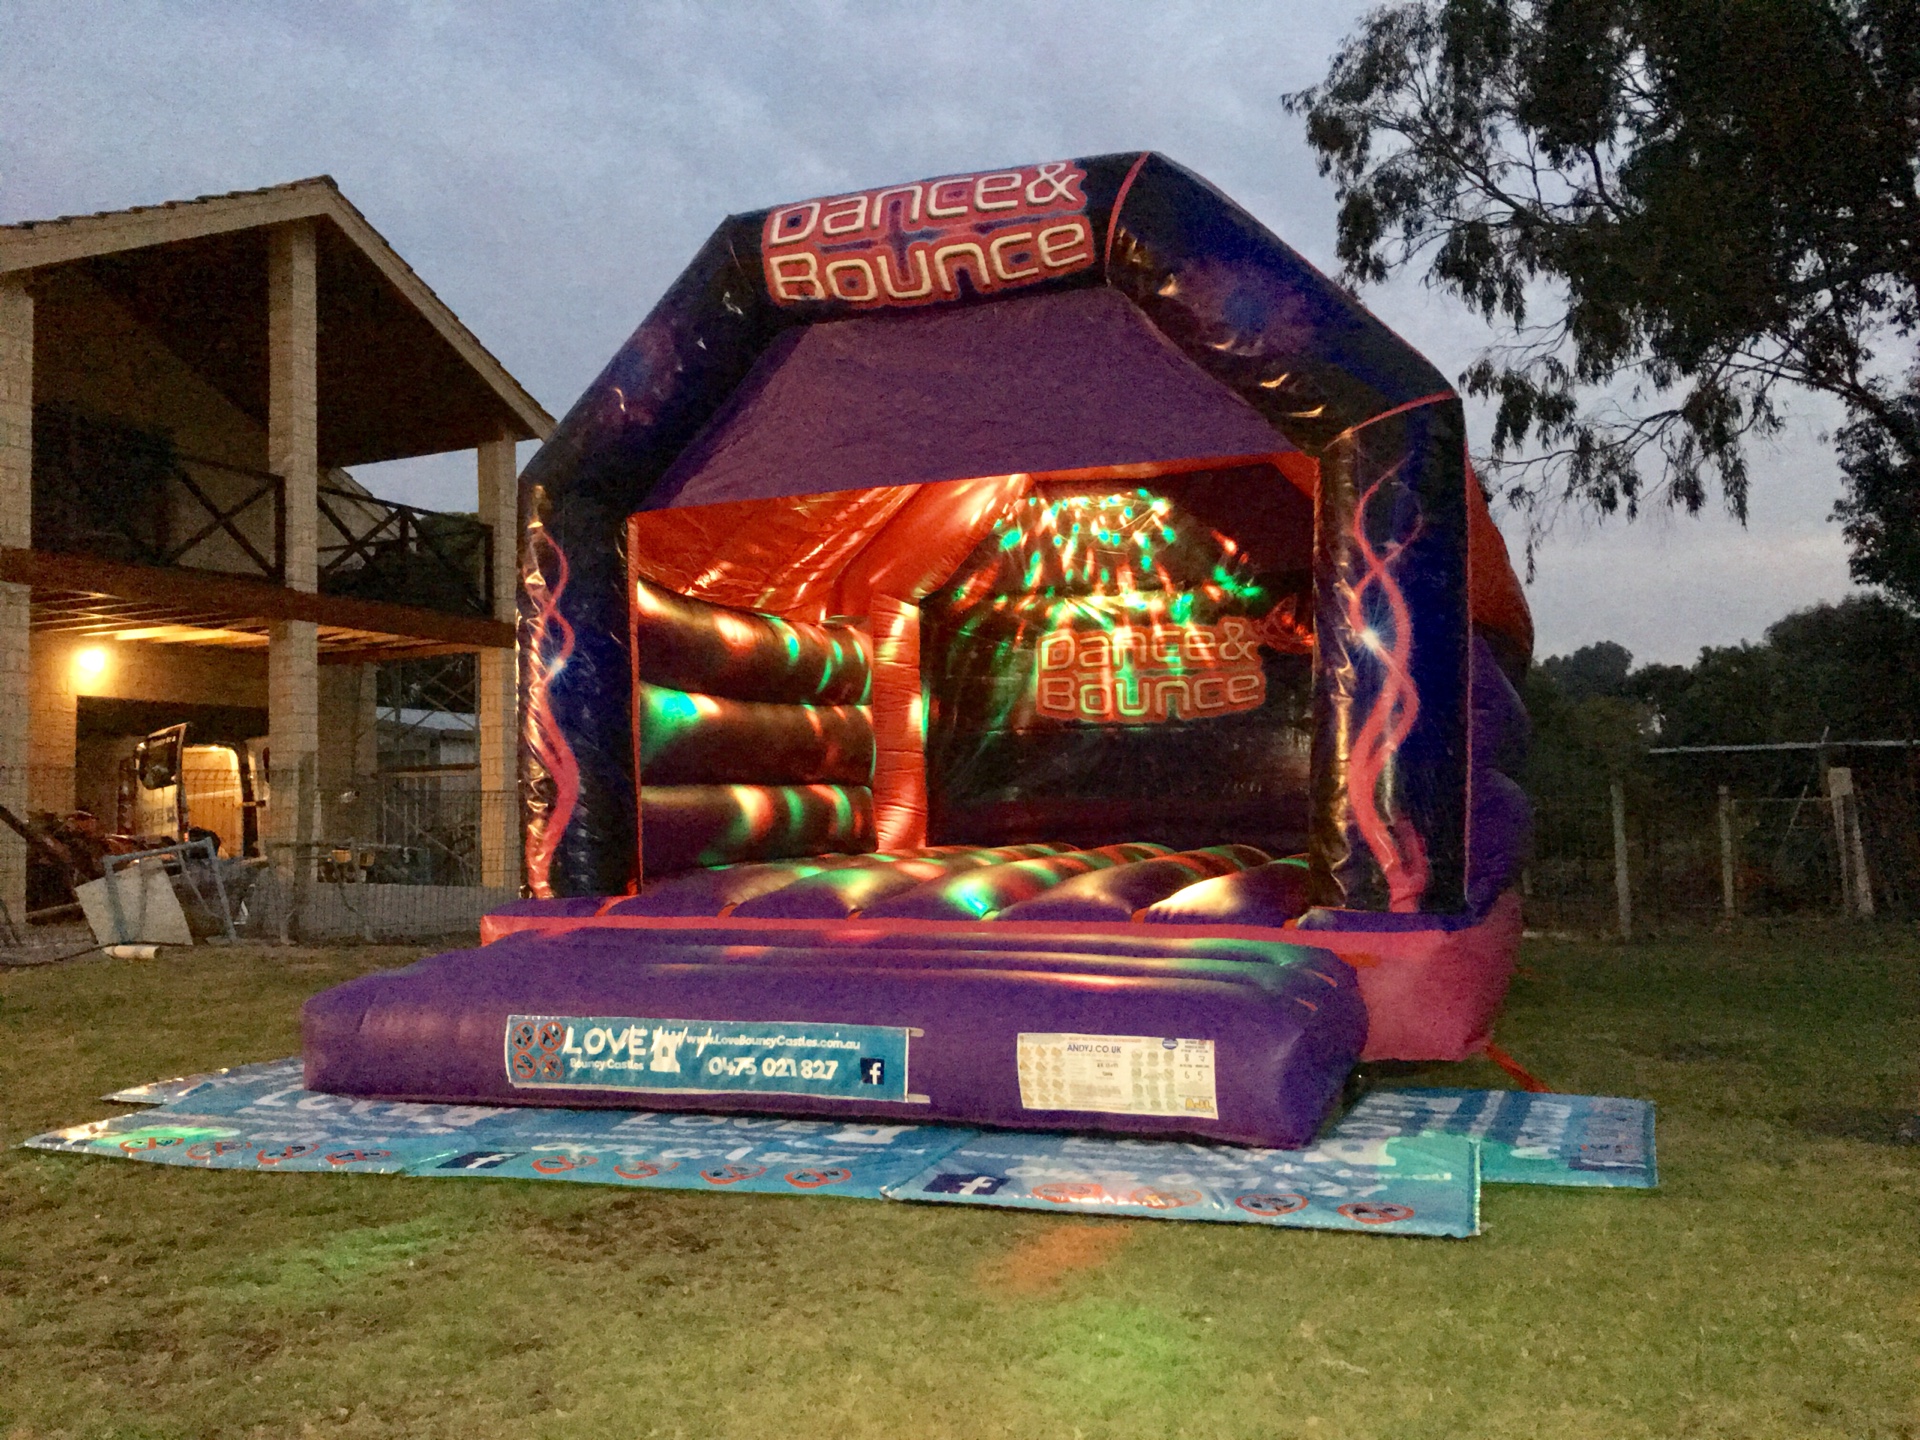 Copy of Dance and Bounce Jumping Castle Night Hire In Perth, WA